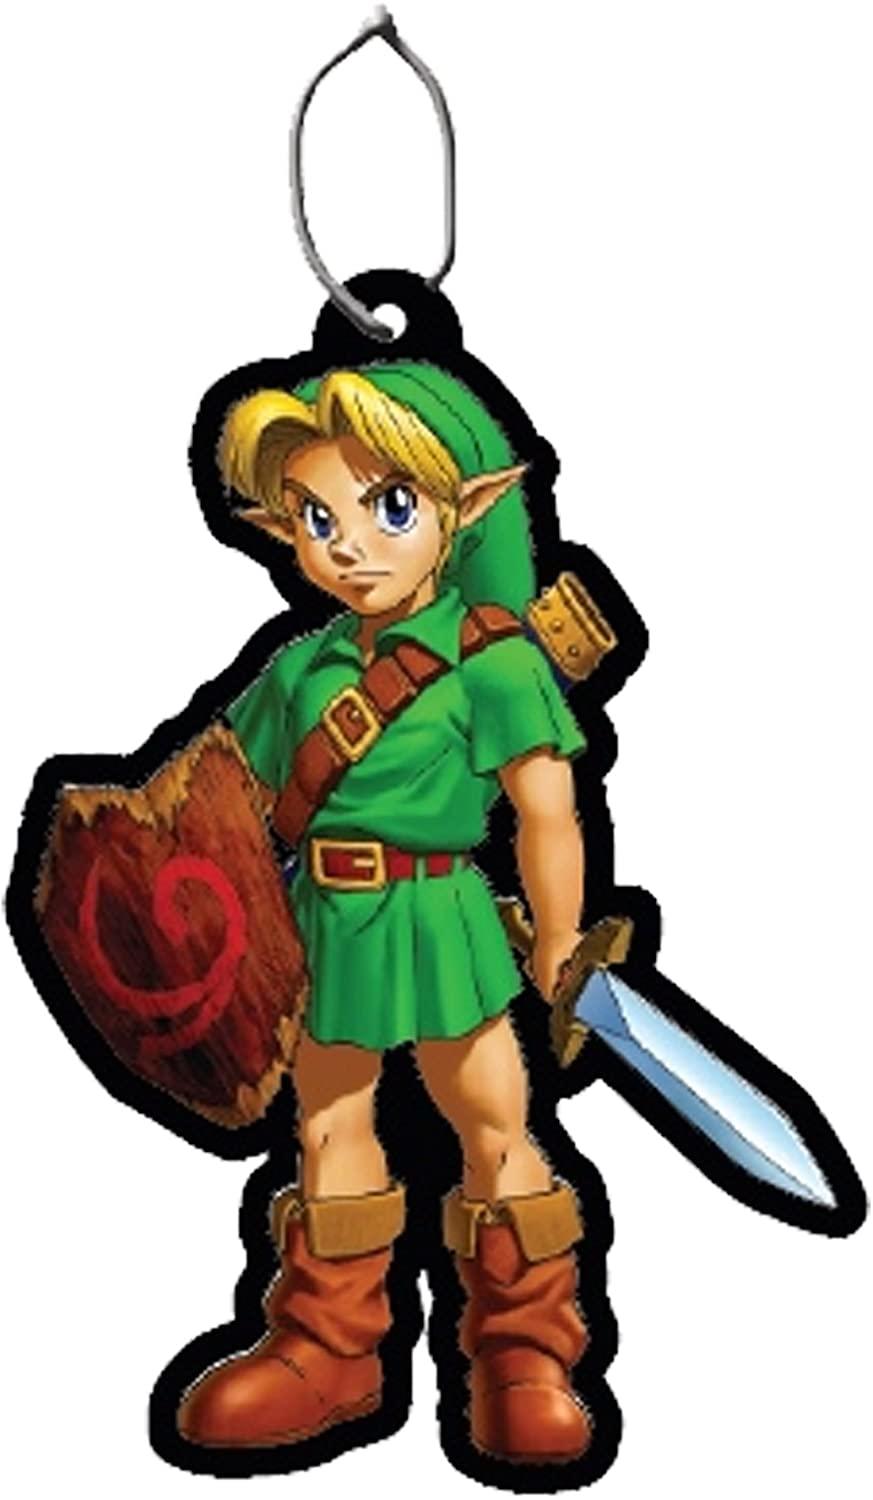 Nintendo Official The Legend of Zelda Young Link Air Freshener by Just Funky